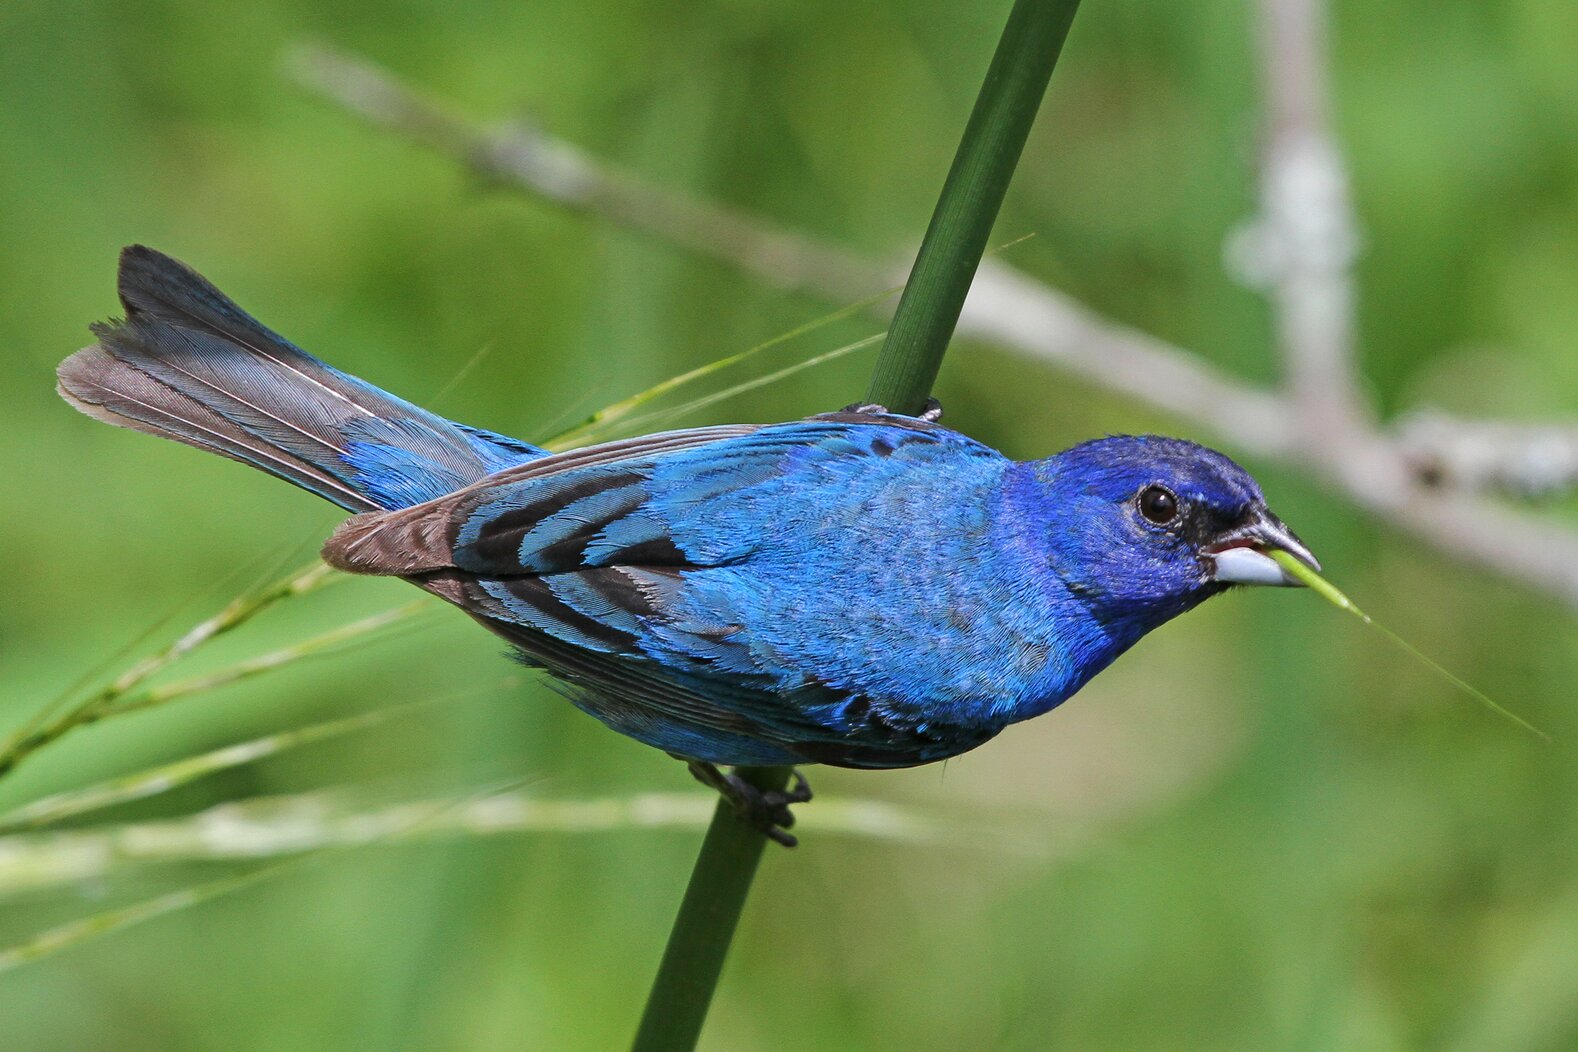  Indigo Buntings nest in a mixed habitat of meadows and trees. Photo: Judy Gallagher/CC BY 2.0